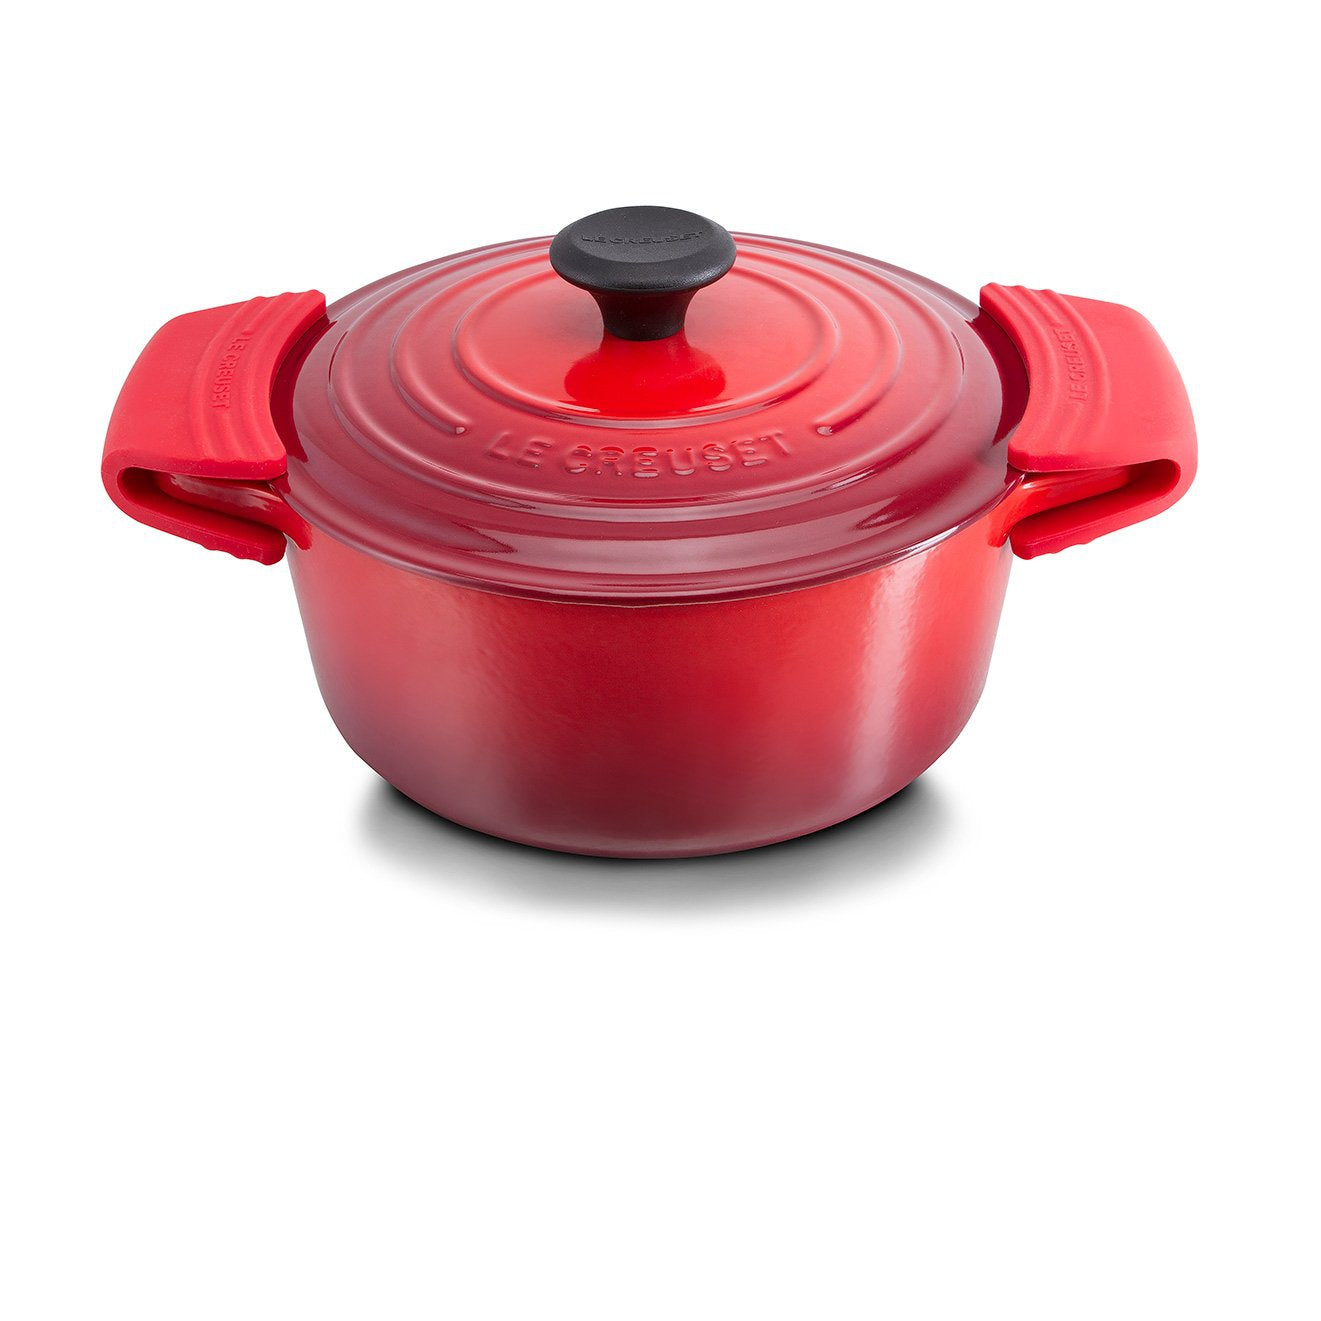 Le Creuset Silicone Handle Grips